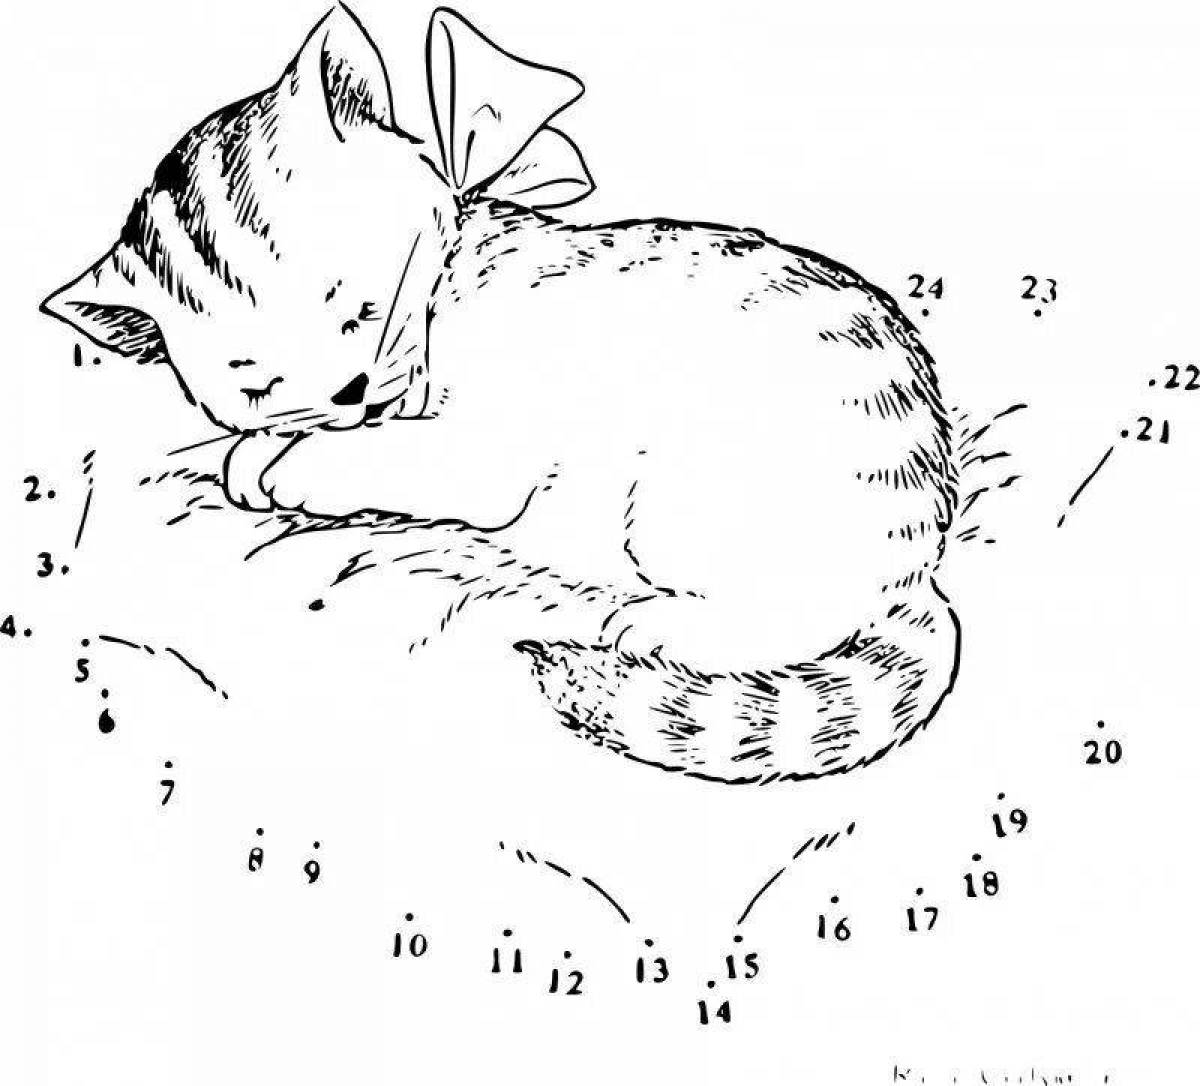 Radiant cat coloring by numbers